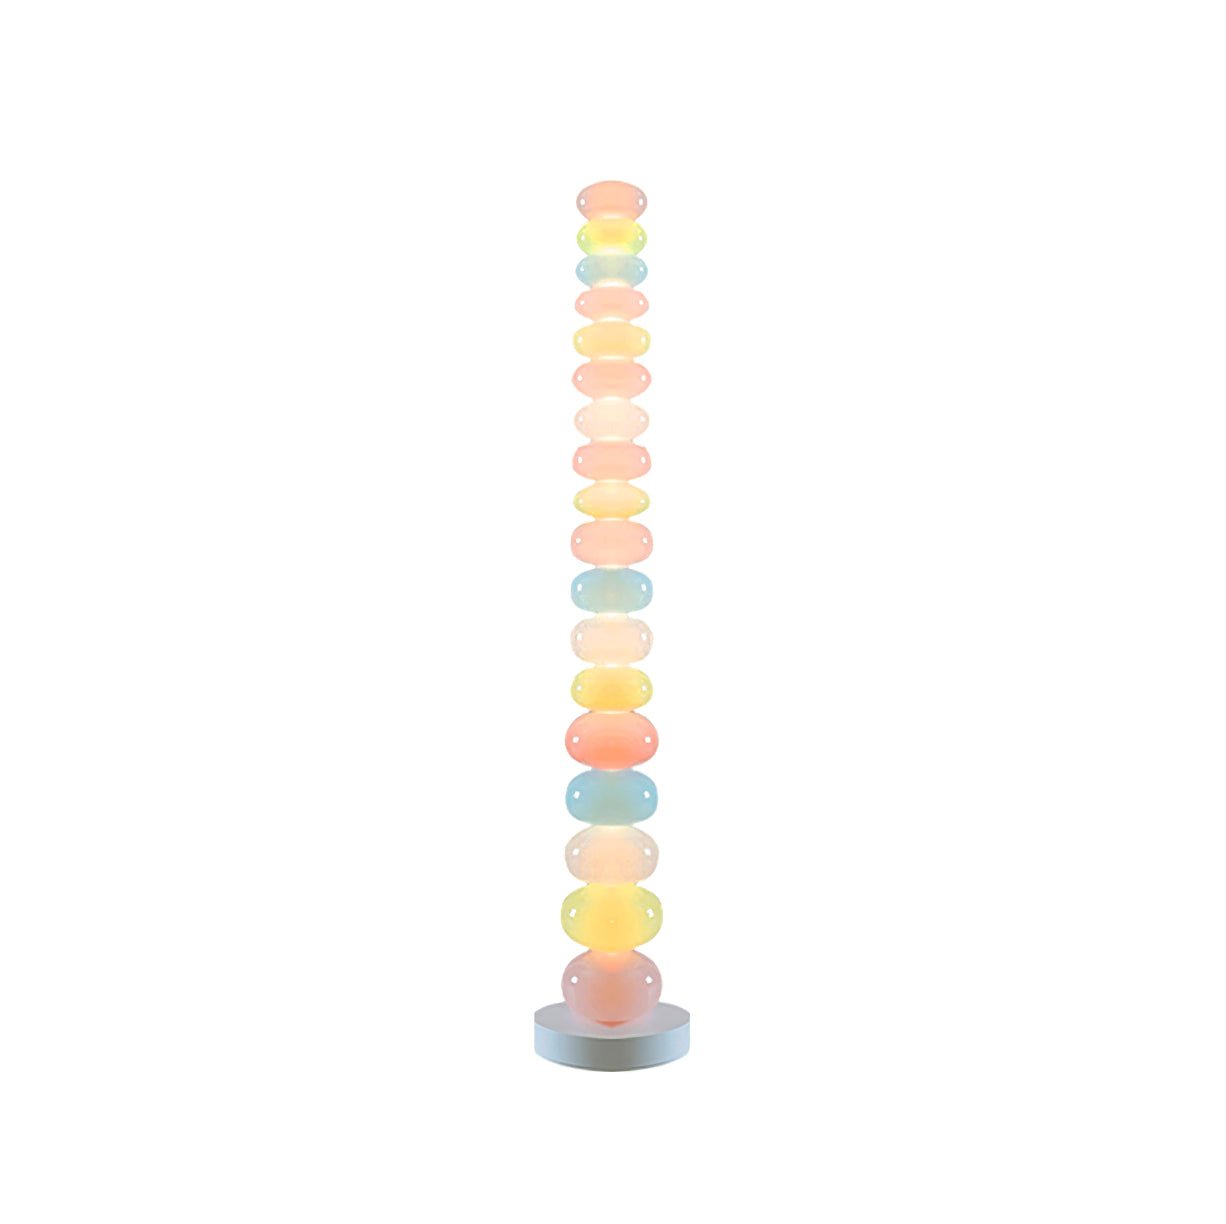 Candy Floor Lamp Model B in Multicolor with EU plug, measuring 11.8" in diameter and 61.4" in height (30cm x 156cm).